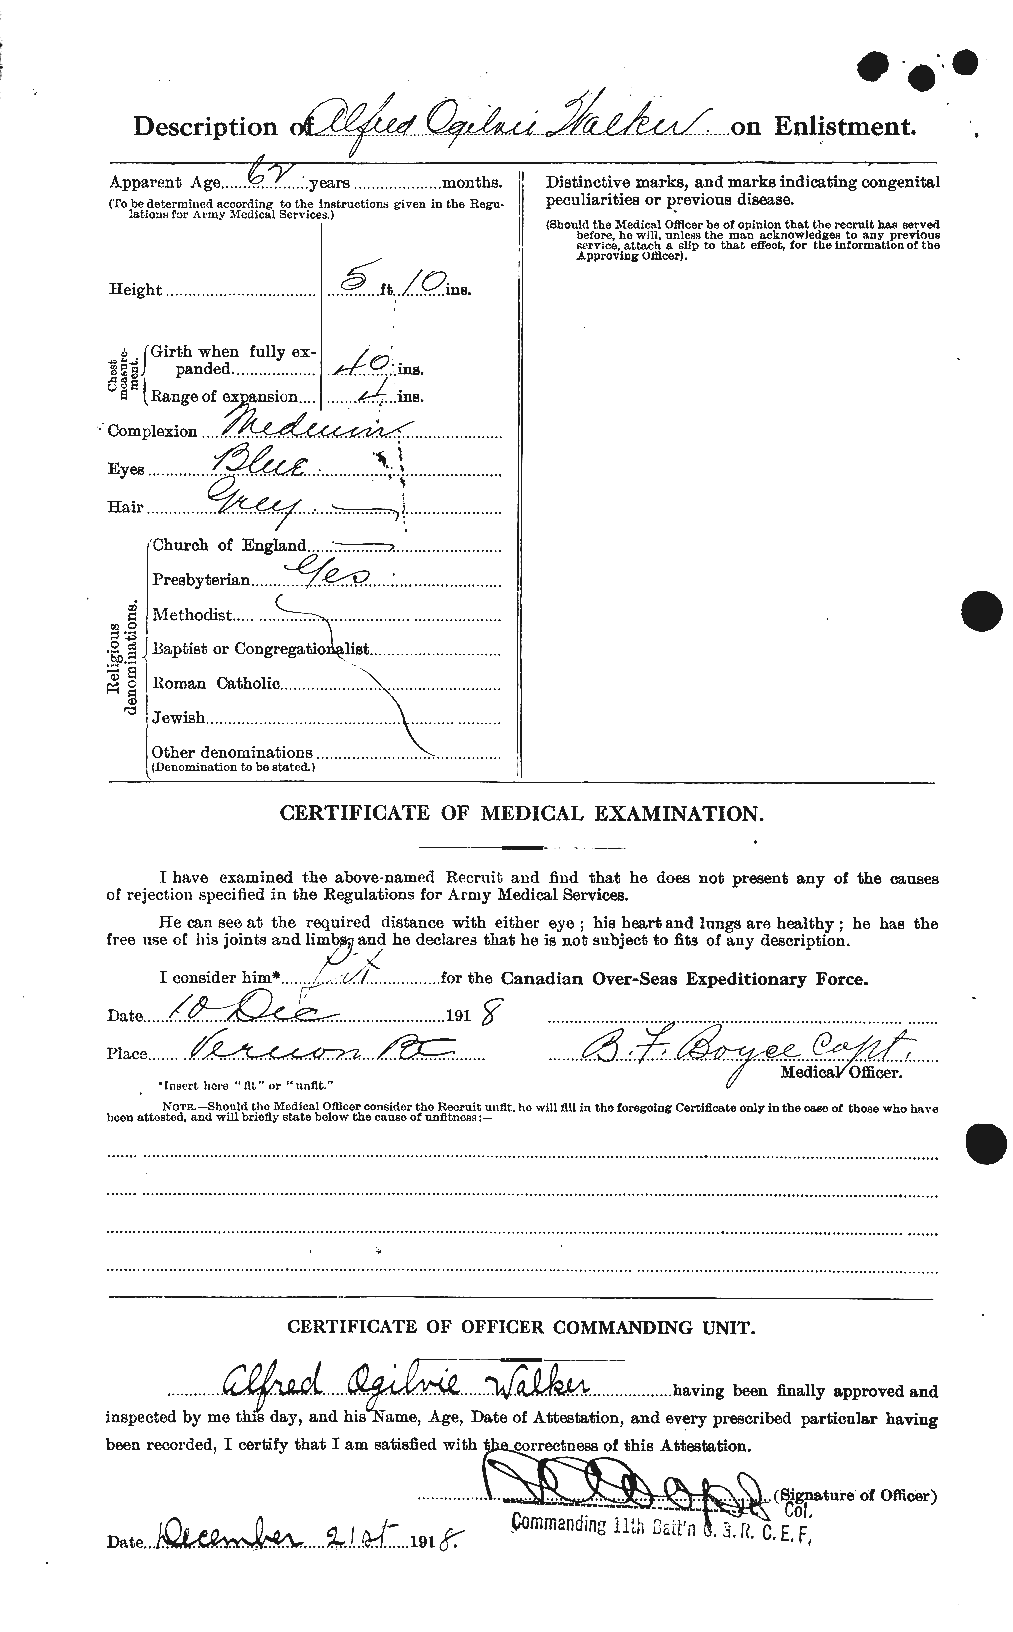 Personnel Records of the First World War - CEF 651050b